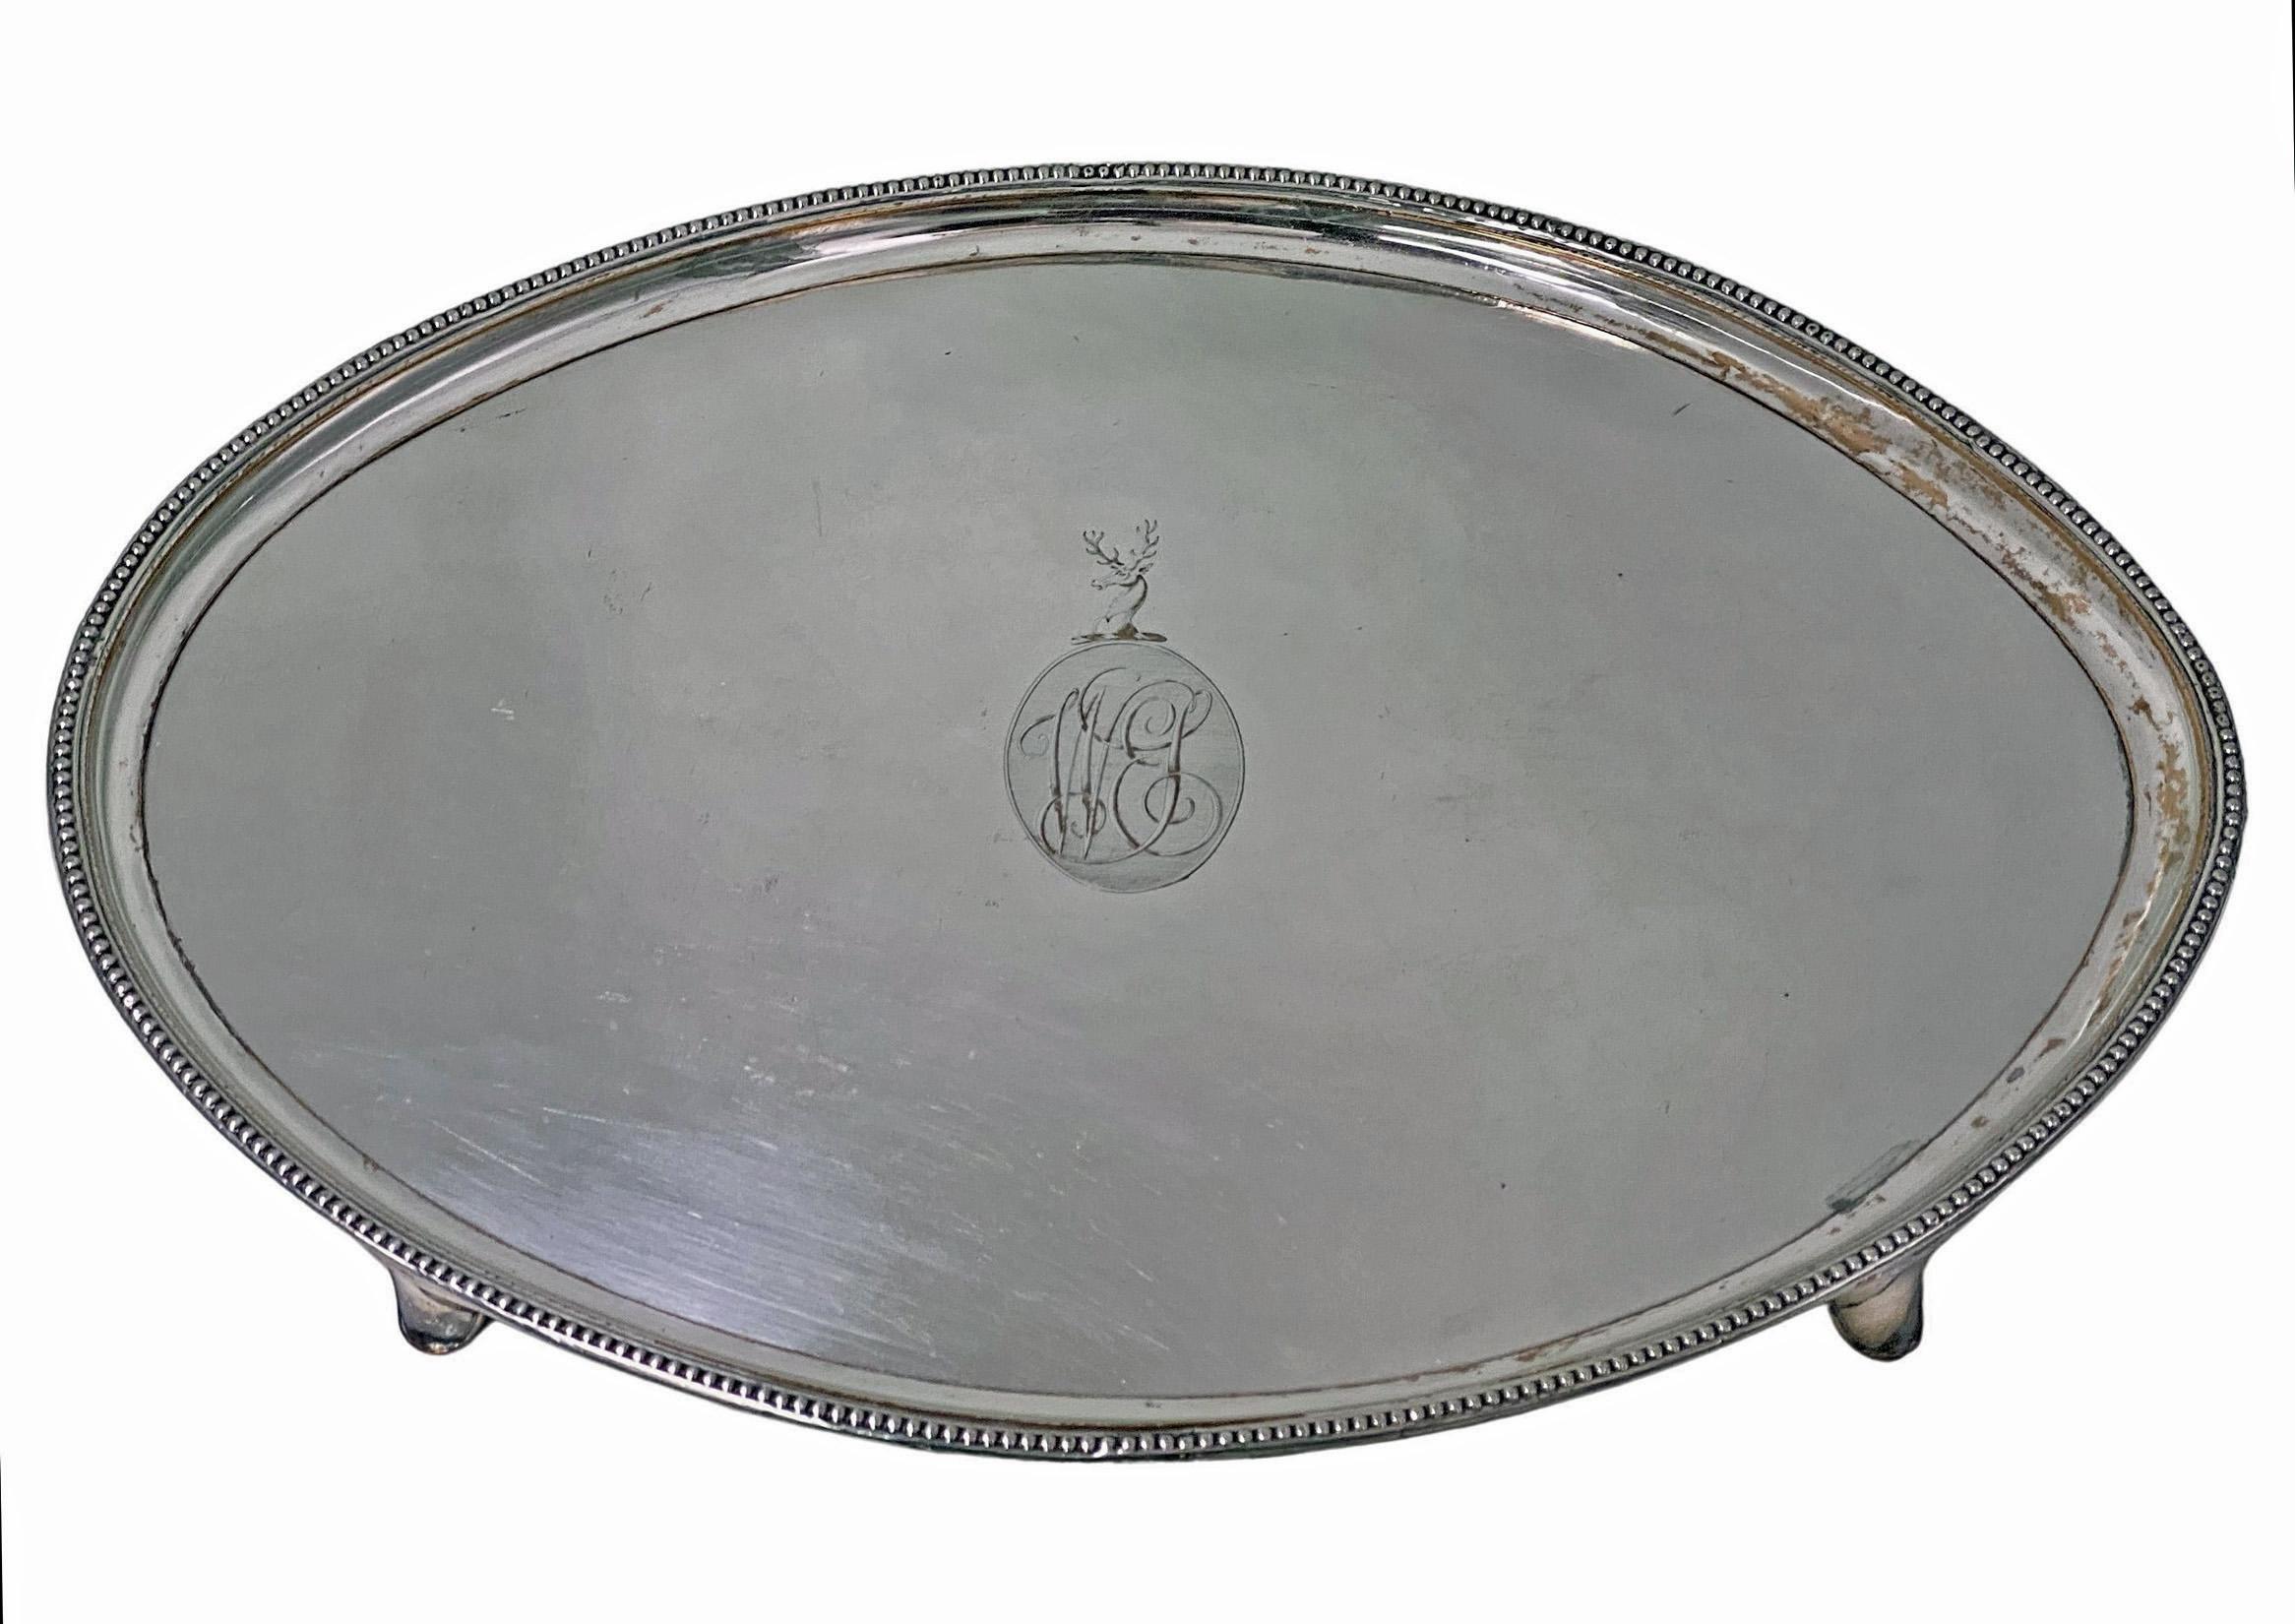 Large 18th century Georgian old sheffield salver England circa .1780. Rare oval shape on four turned supports, bead border and engraved crest of stag in the centre with monogram beneath. Original patina, bleeding in on high points. The base with